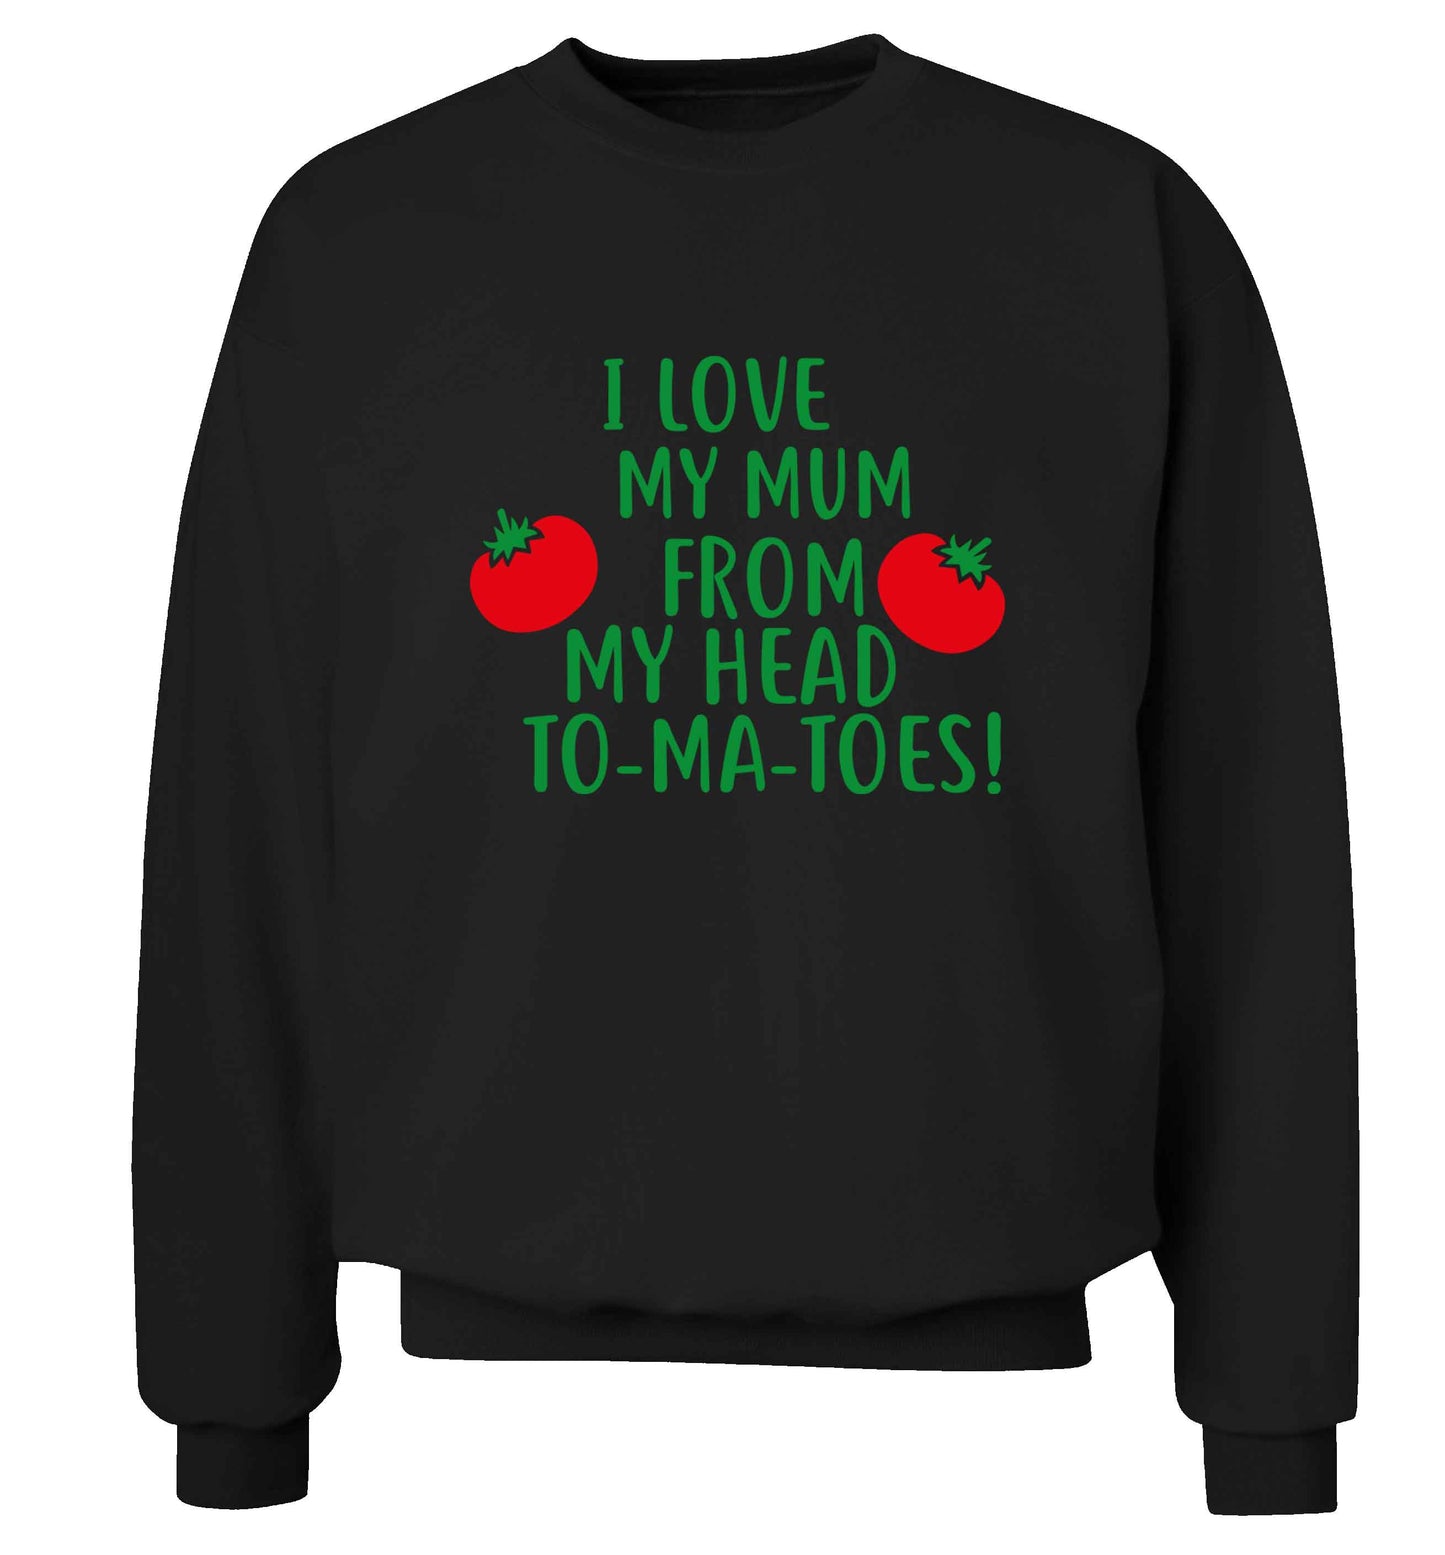 I love my mum from my head to-my-toes! adult's unisex black sweater 2XL